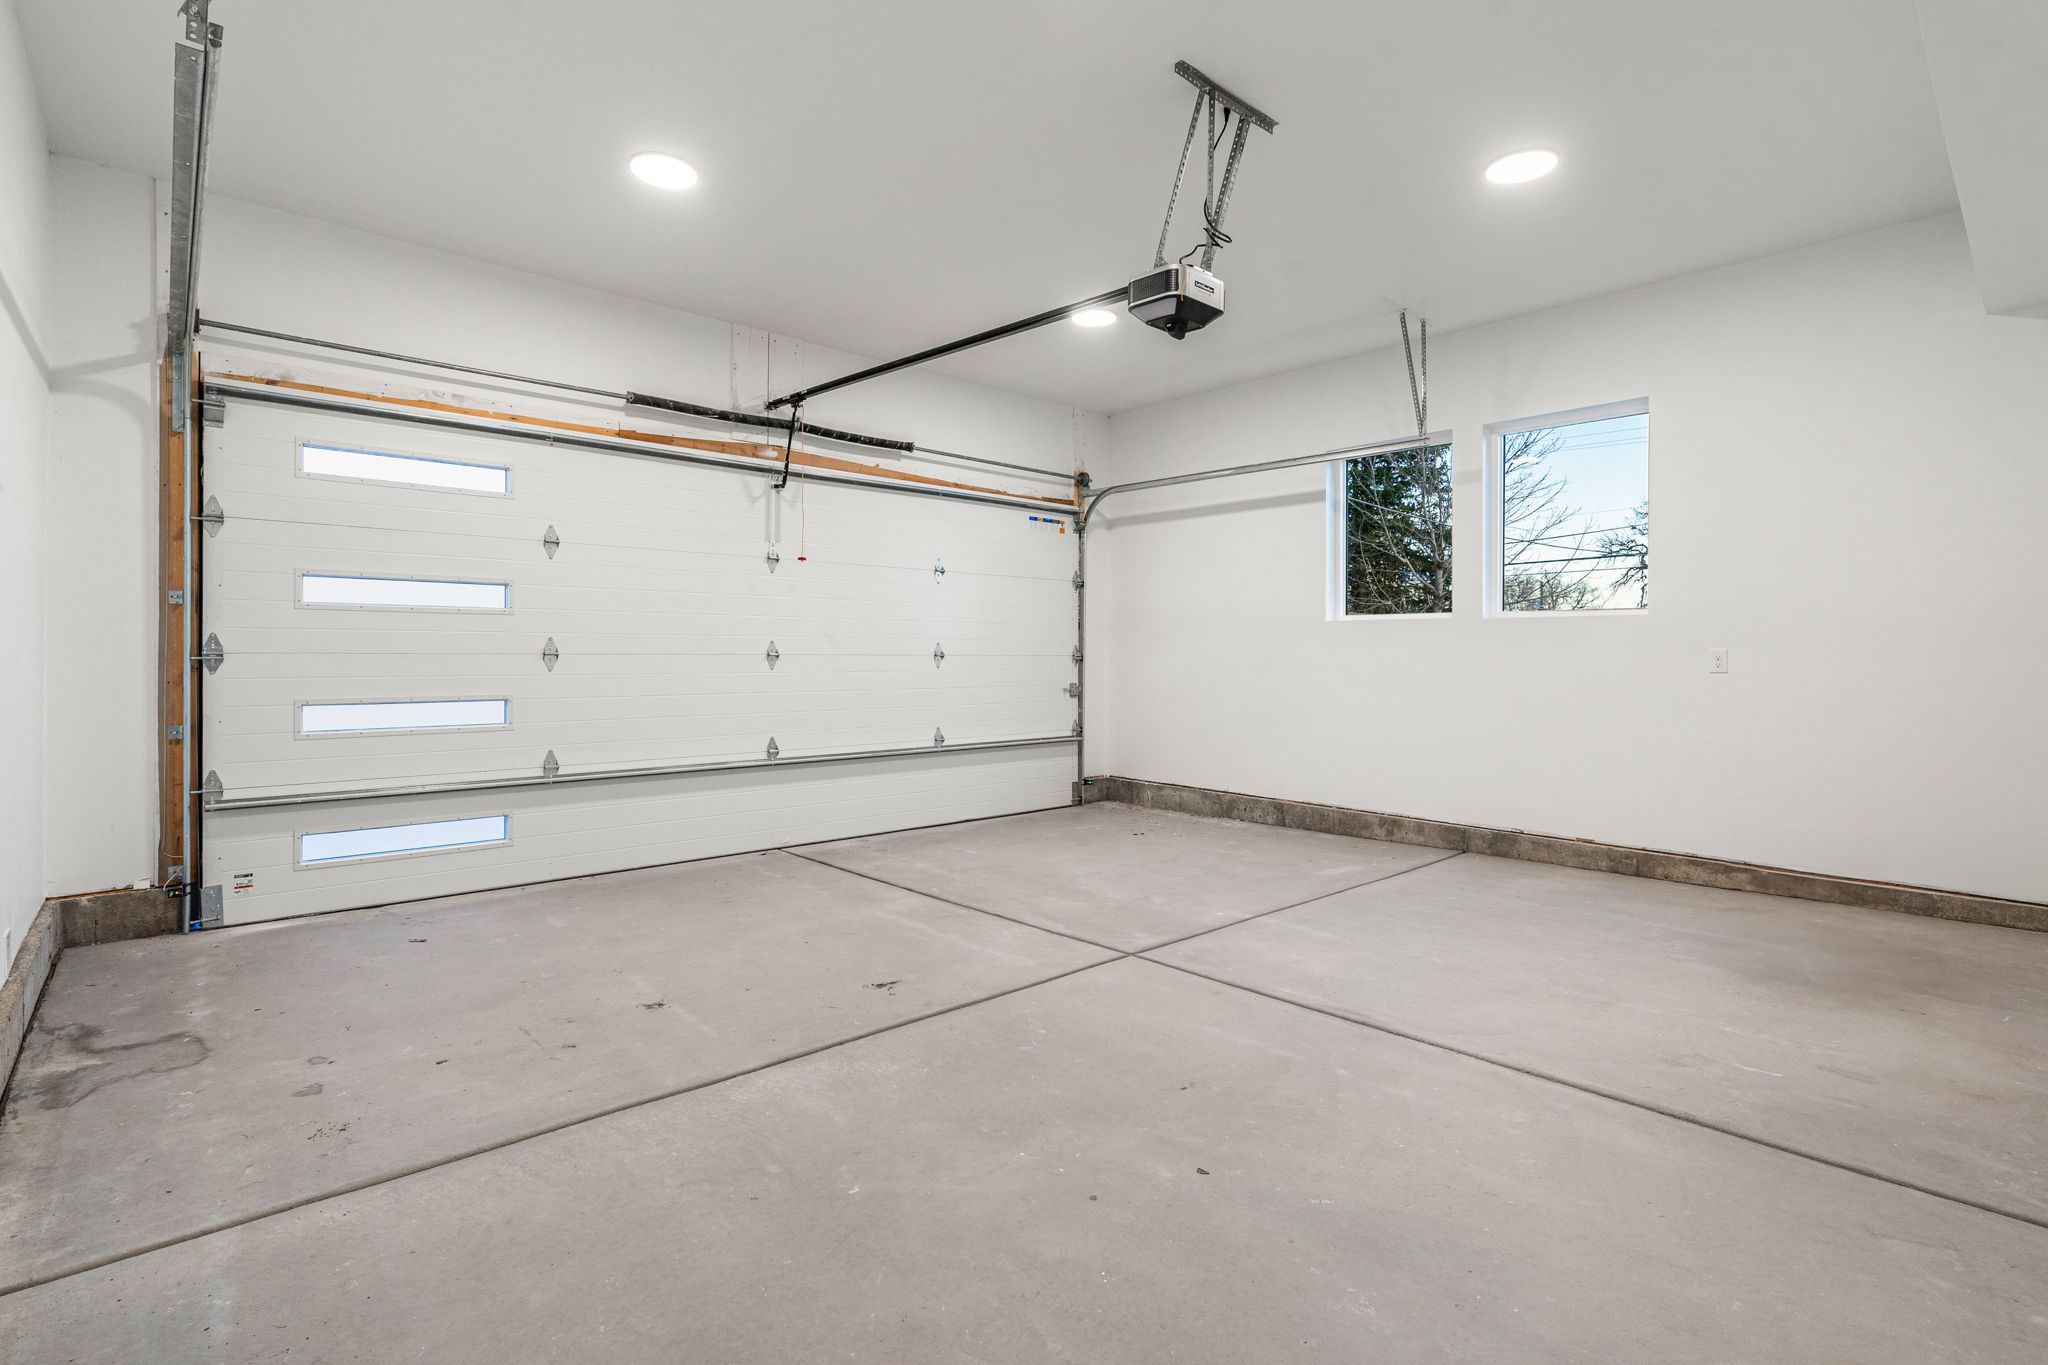 The garage interior is finished with textured and painted walls.